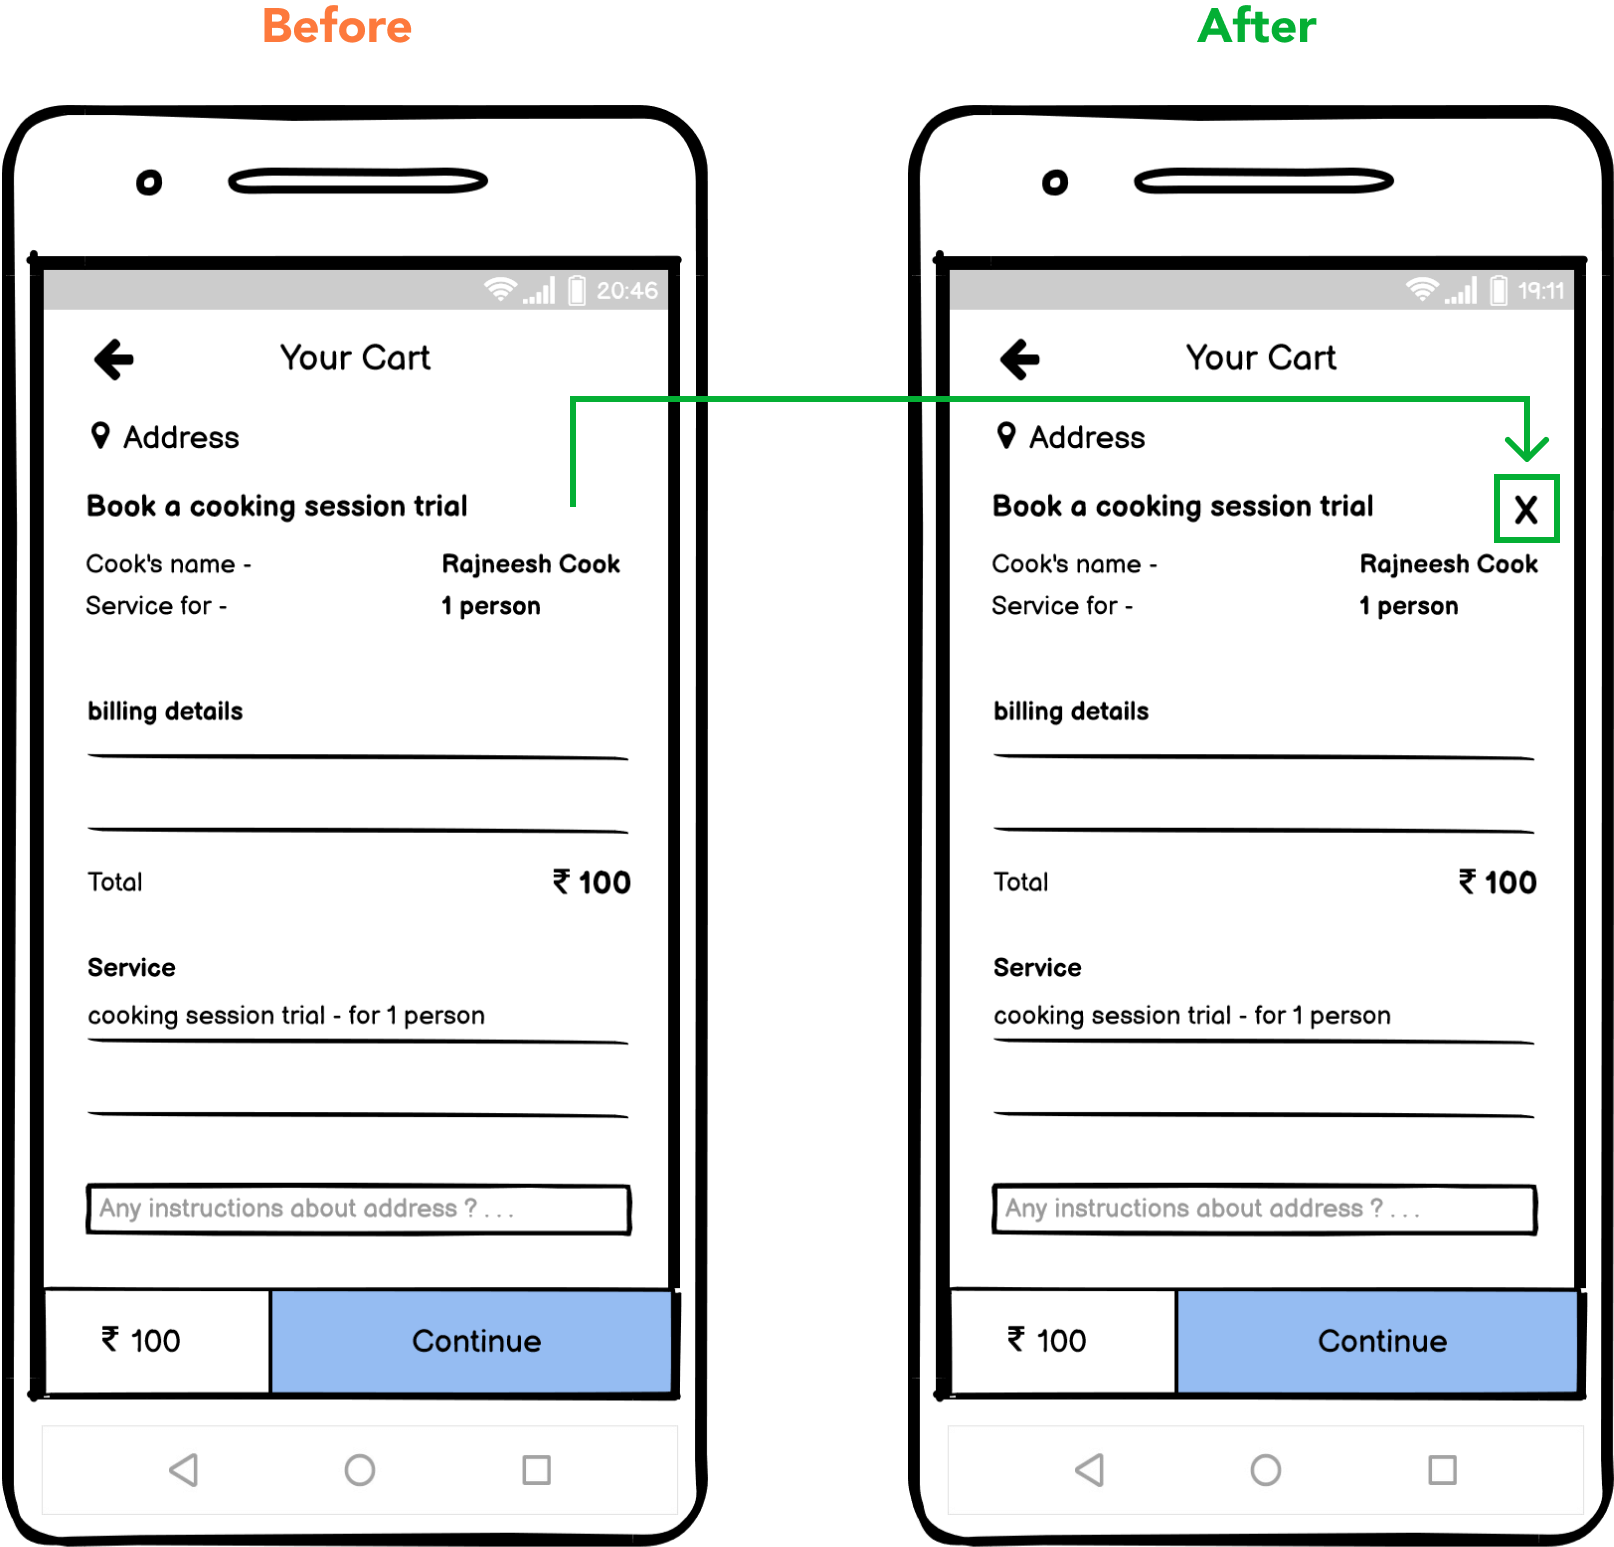 evaluation of user flow using wireframes image 1